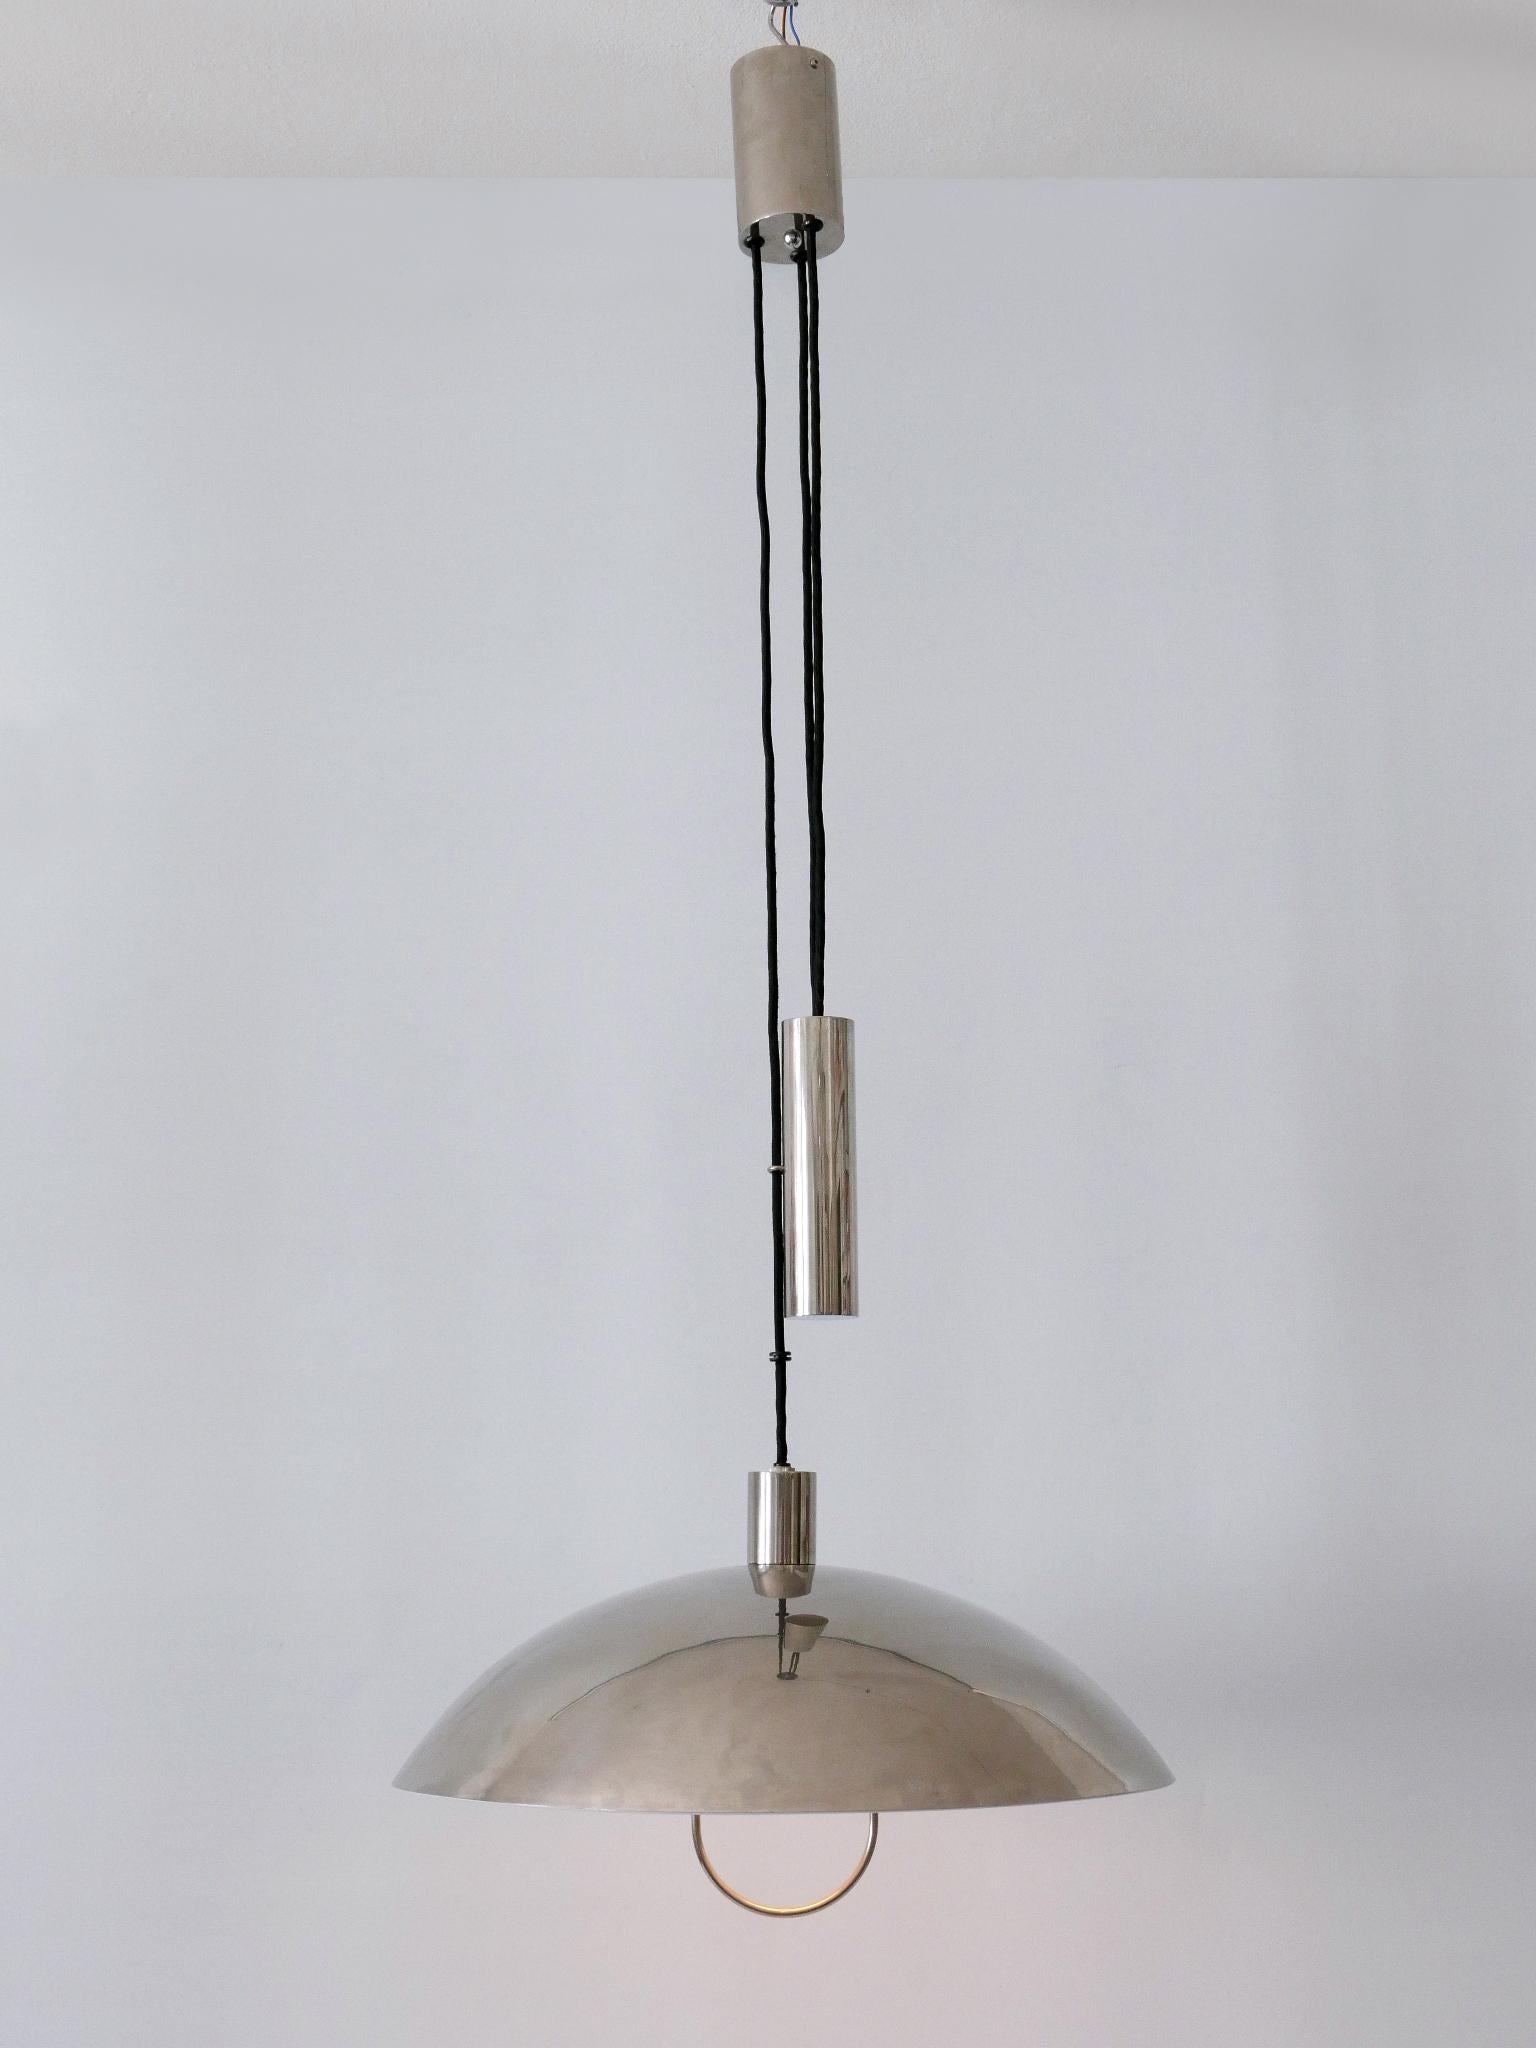 Early production counterweight pendant lamp or hanging light 